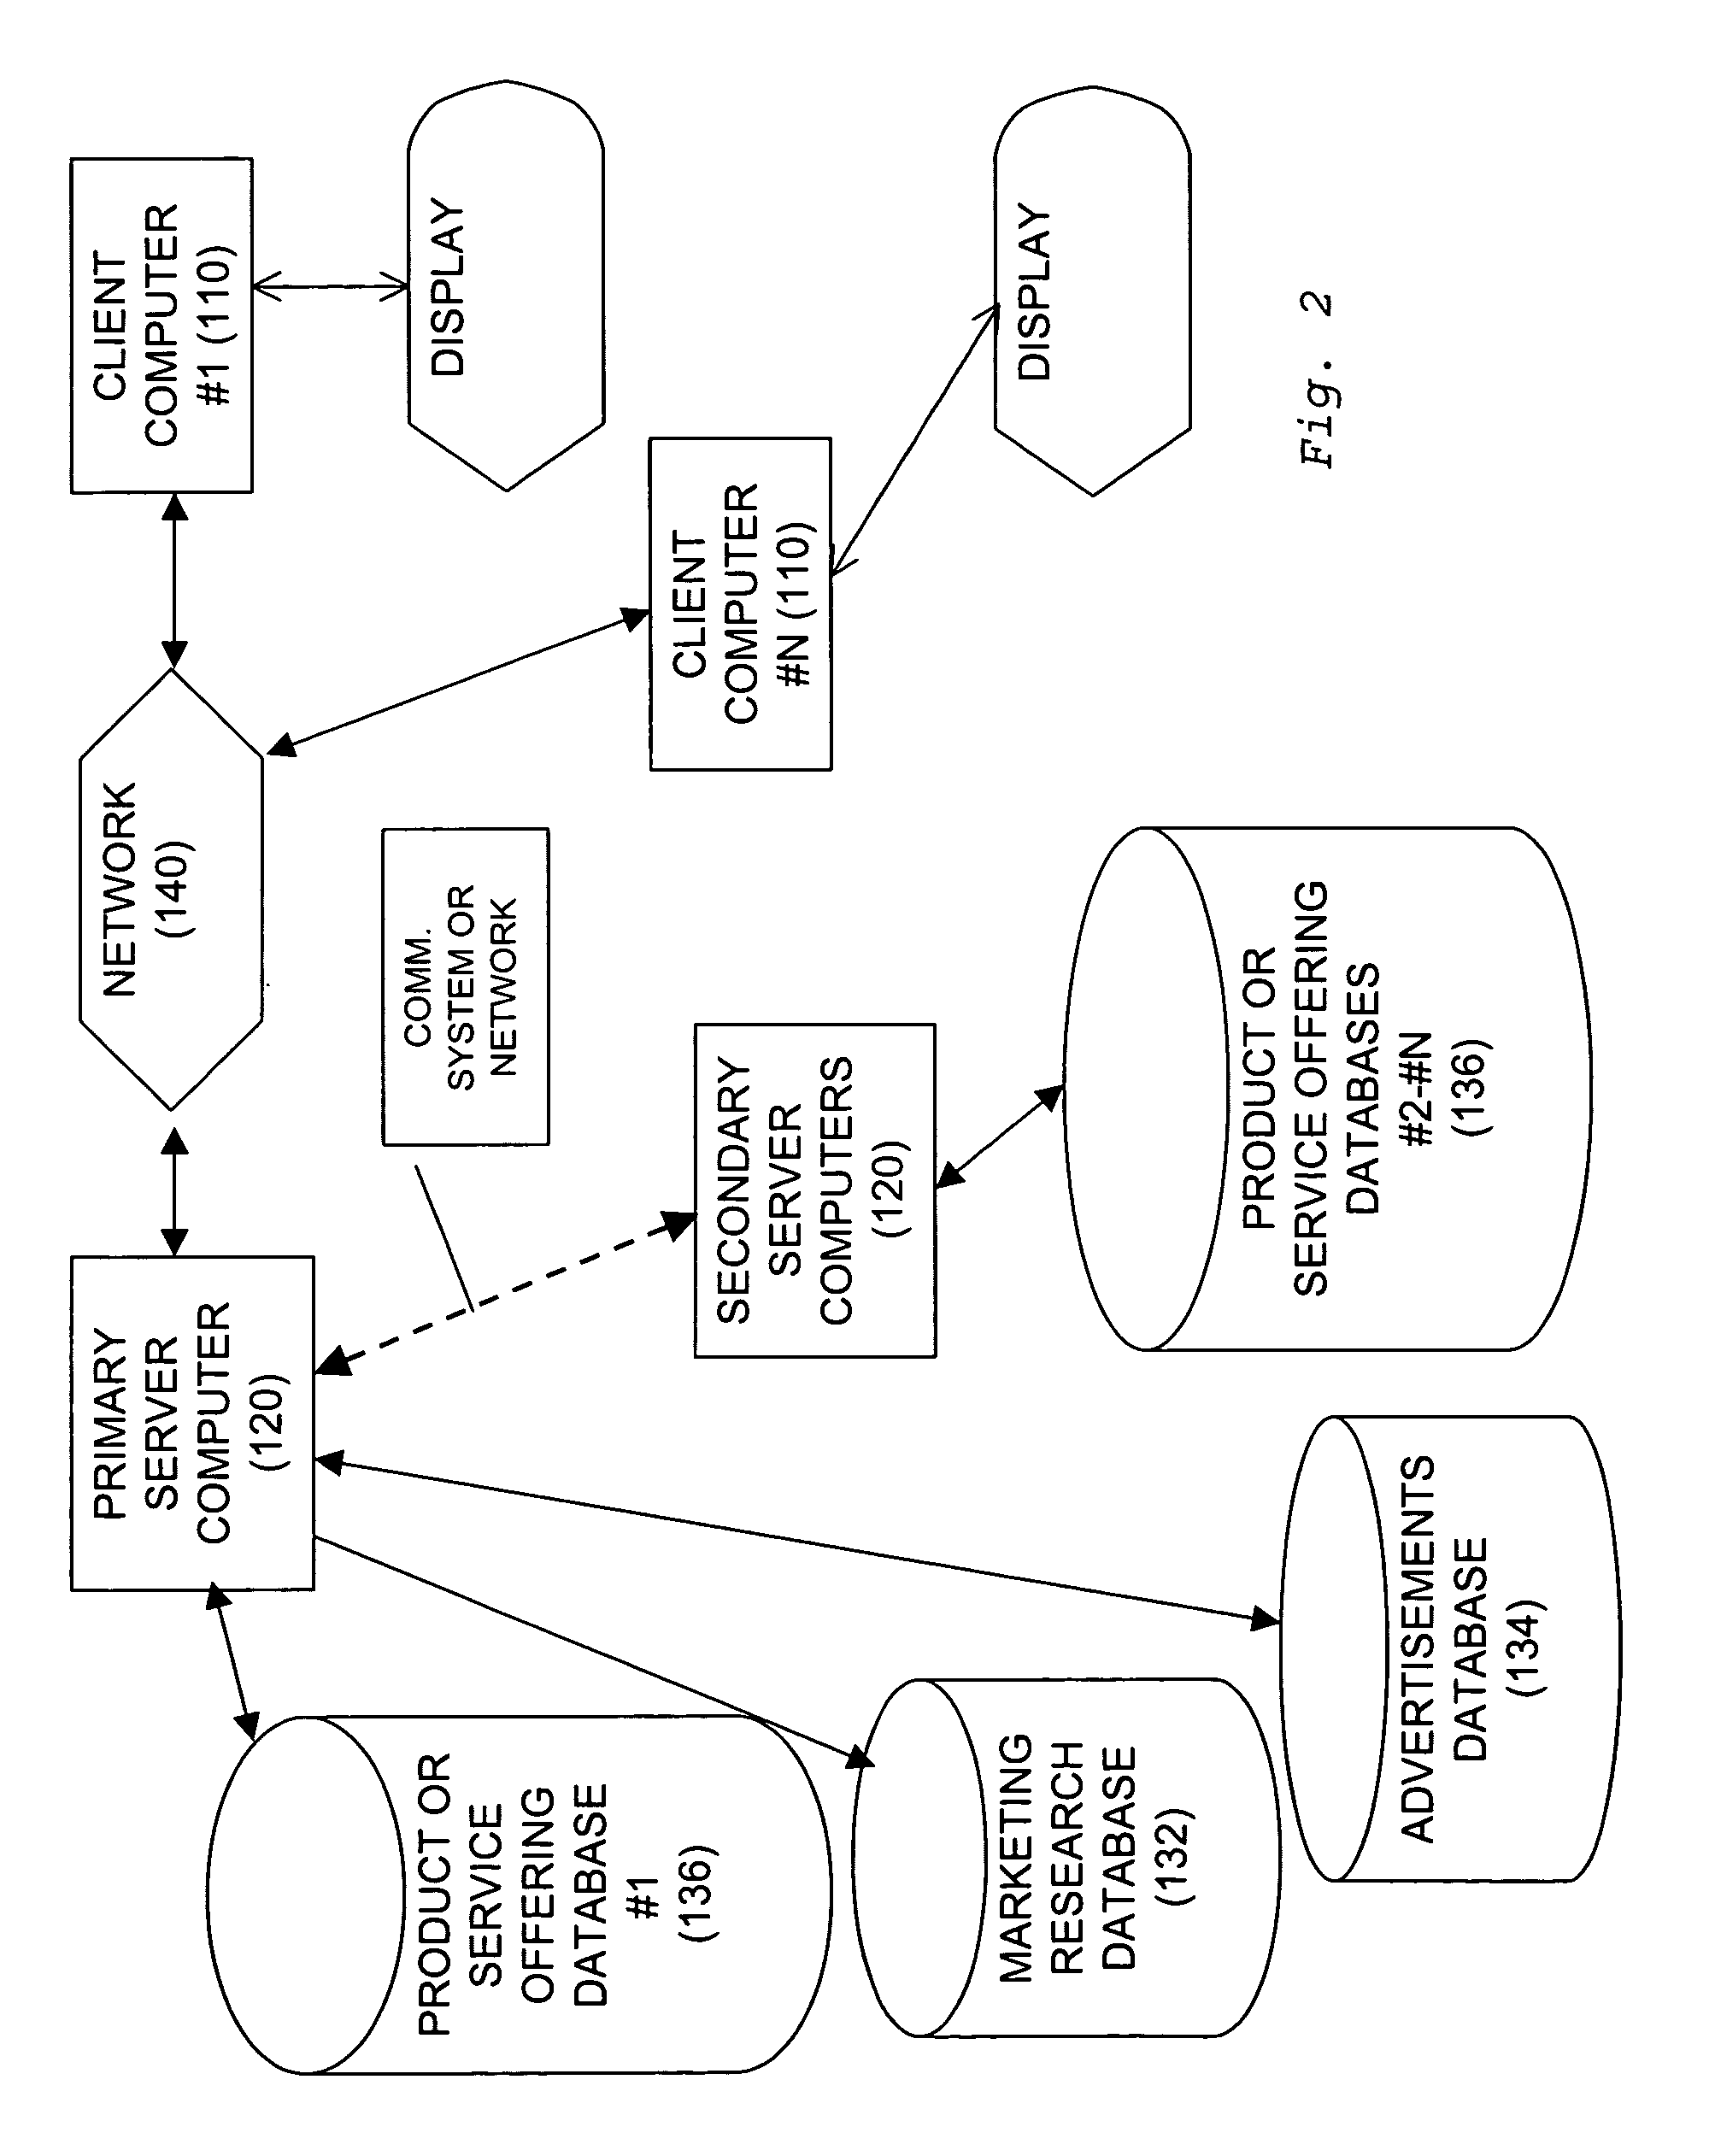 Method and apparatus for obtaining consumer product preferences through product selection and evaluation